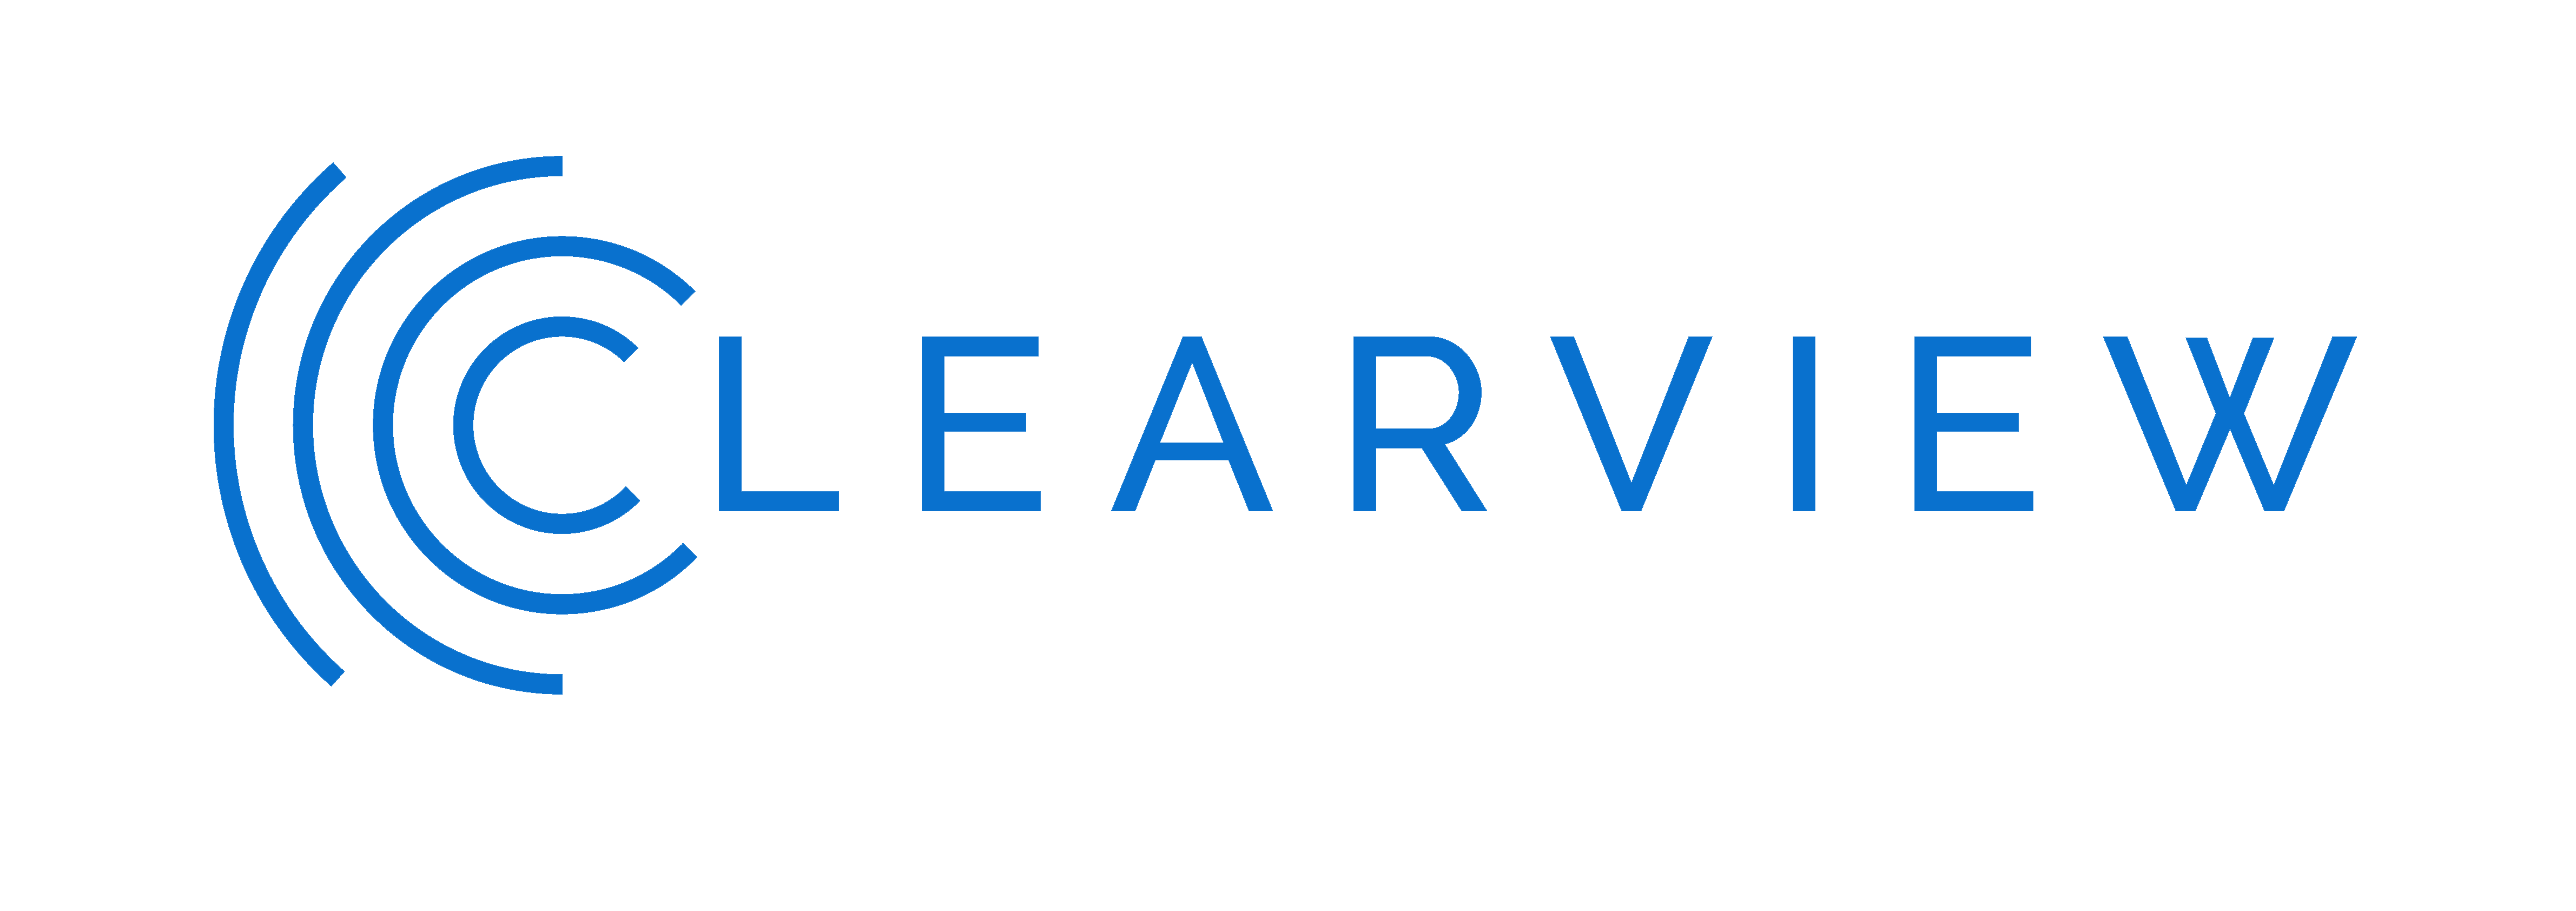 ClearView (blue with transparent background)